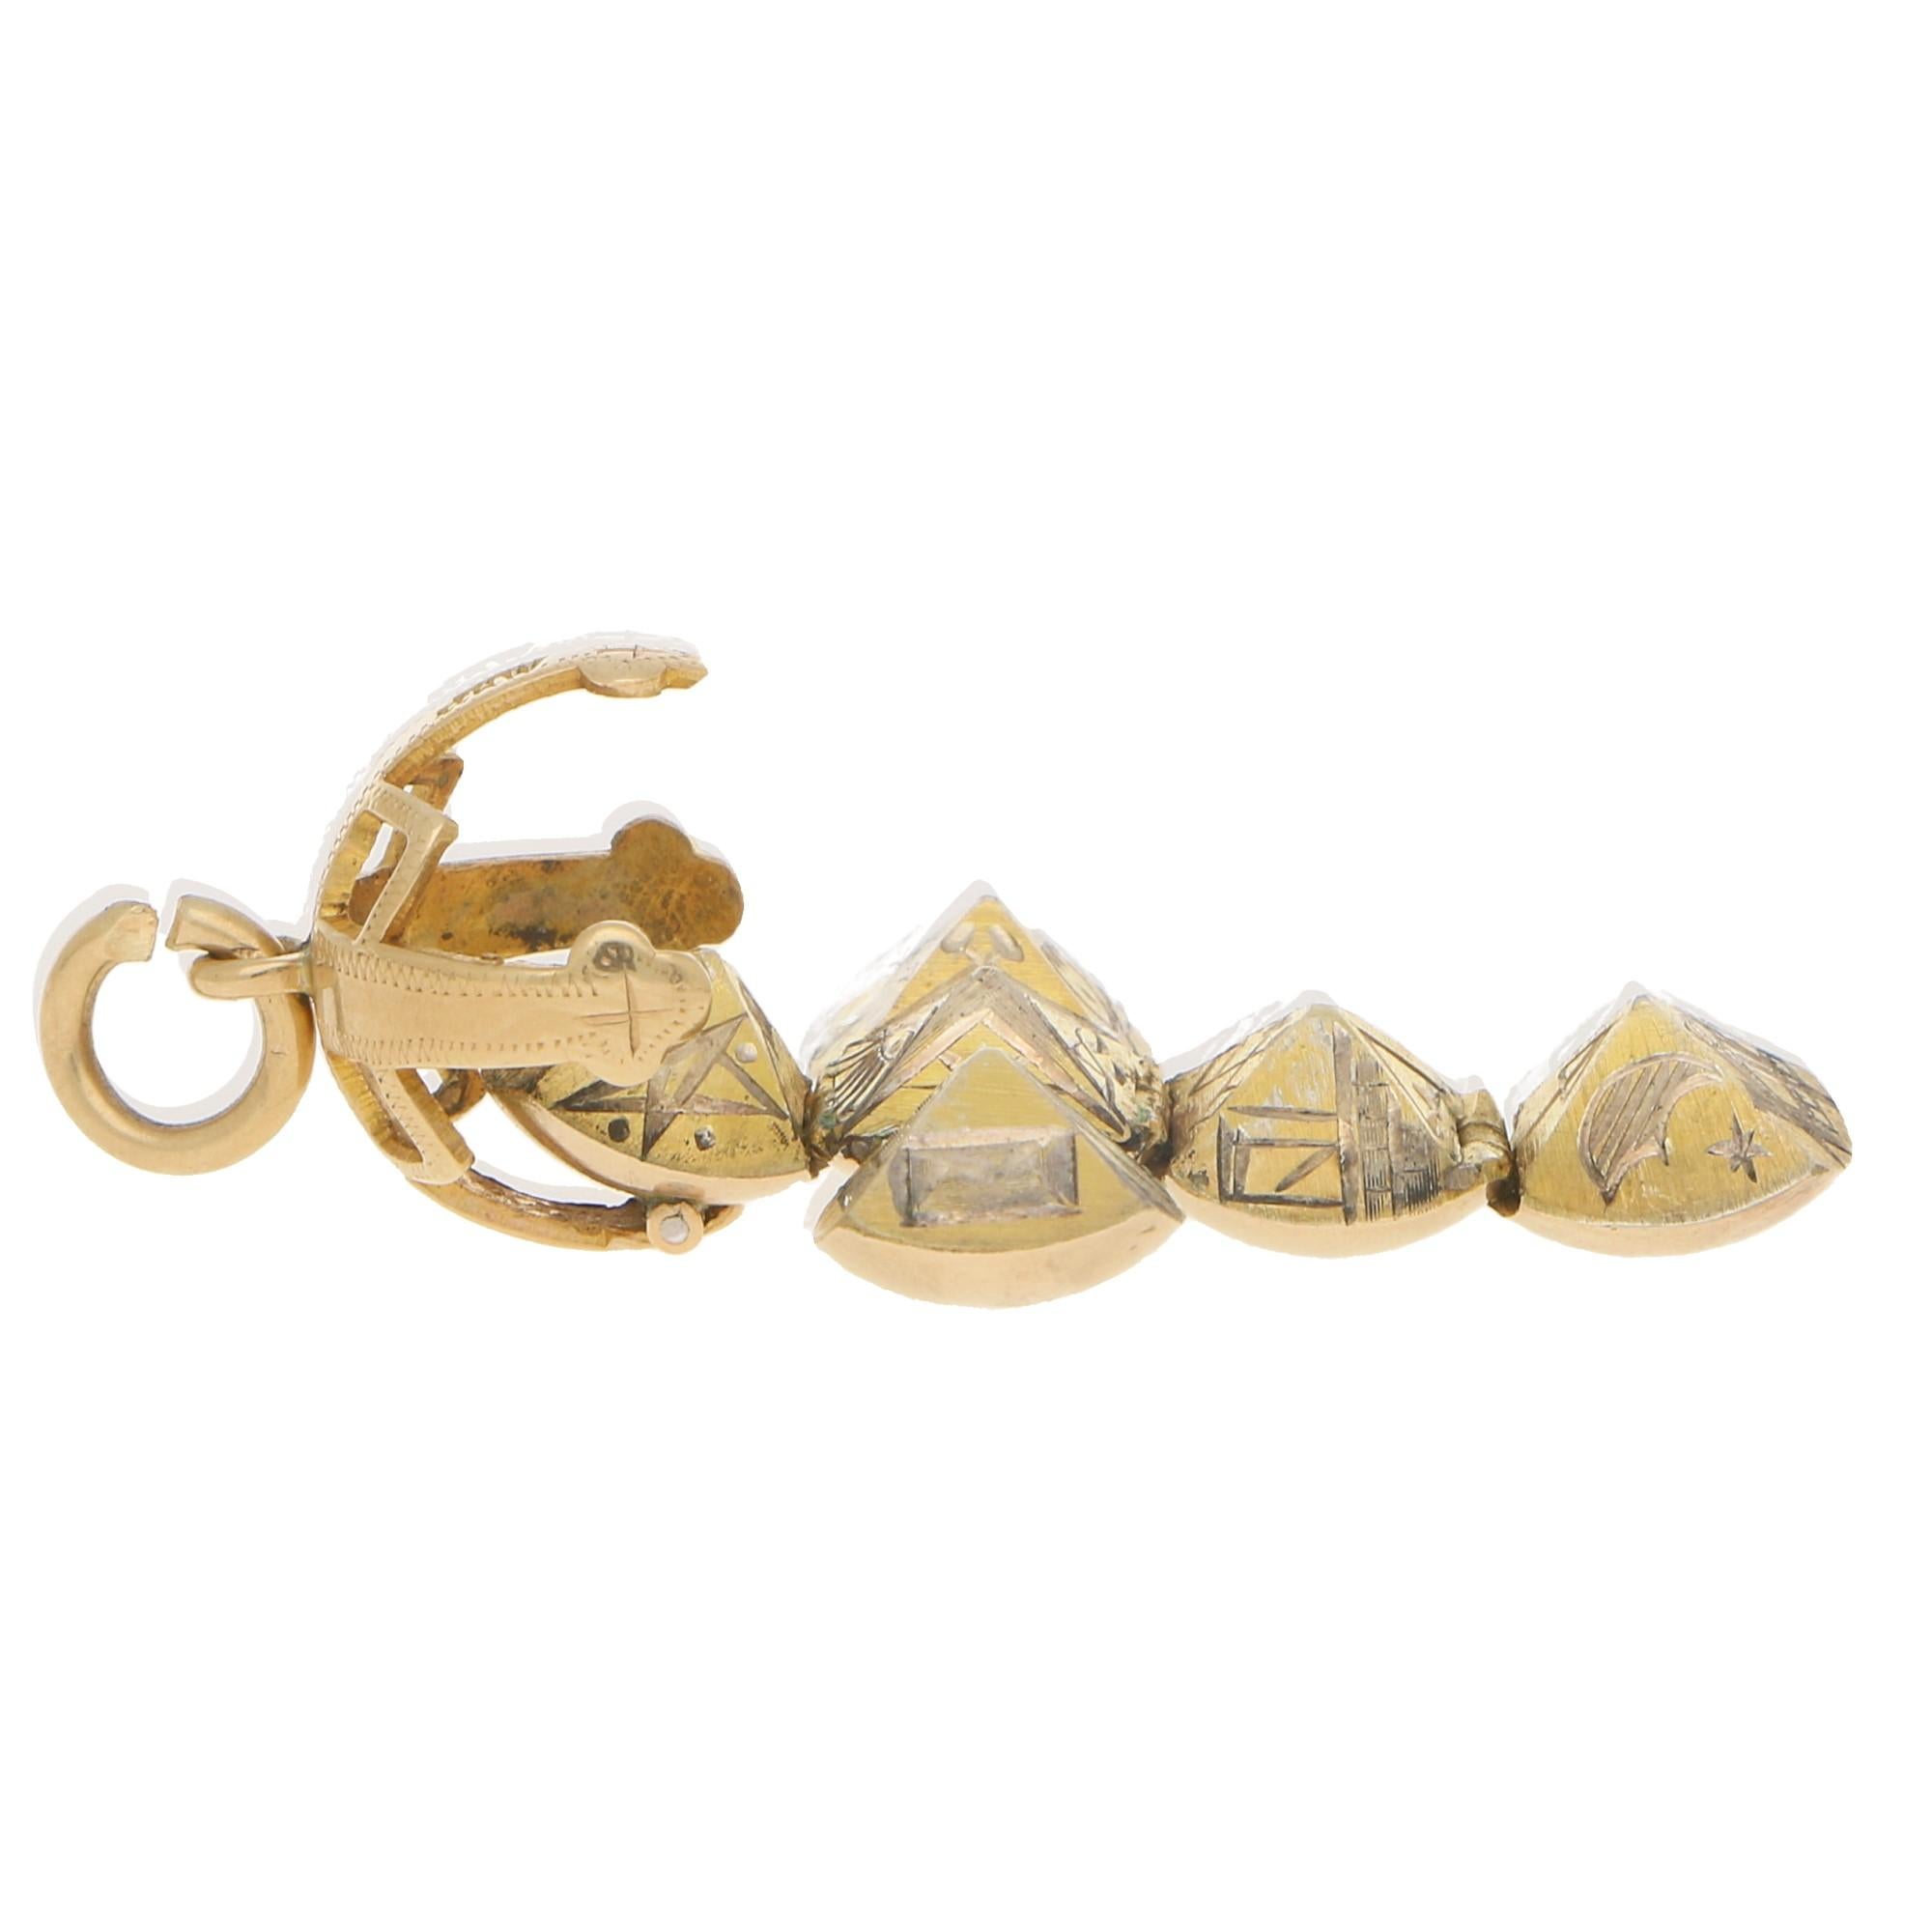 A very unusual and highly collectible British Masonic Orb ball charm set in 9k yellow gold and silver. This highly unique piece opens to reveal beautifully hand engraved equally sized pyramids, there are 6 pyramids in total and 24 masonic symbols (4